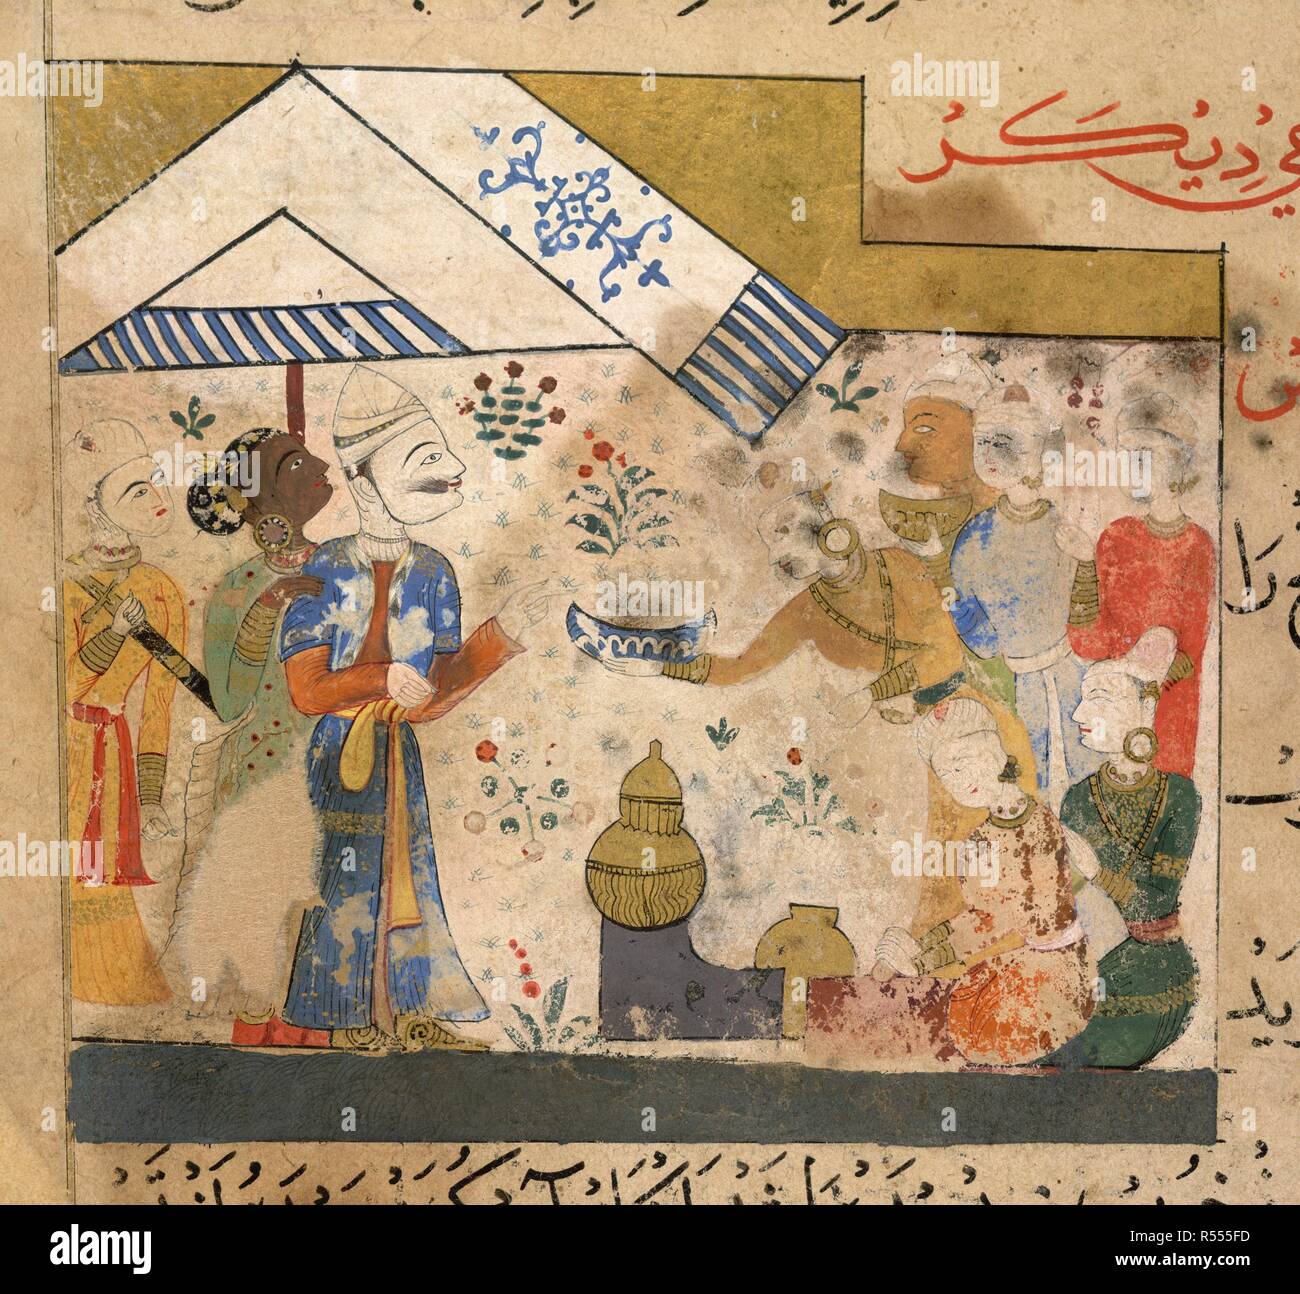 Preparation of flummery. The Ni'matnama-i Nasir al-Din Shah. A manuscript o. 1495 - 1505. Preparation of flummery for the Sultan Ghiyath al-Din. Opaque watercolour. Sultanate style.  Image taken from The Ni'matnama-i Nasir al-Din Shah. A manuscript on Indian cookery and the preparation of sweetmeats, spices etc.  Originally published/produced in 1495 - 1505. . Source: I.O. ISLAMIC 149, f.189v. Language: Persian. Stock Photo